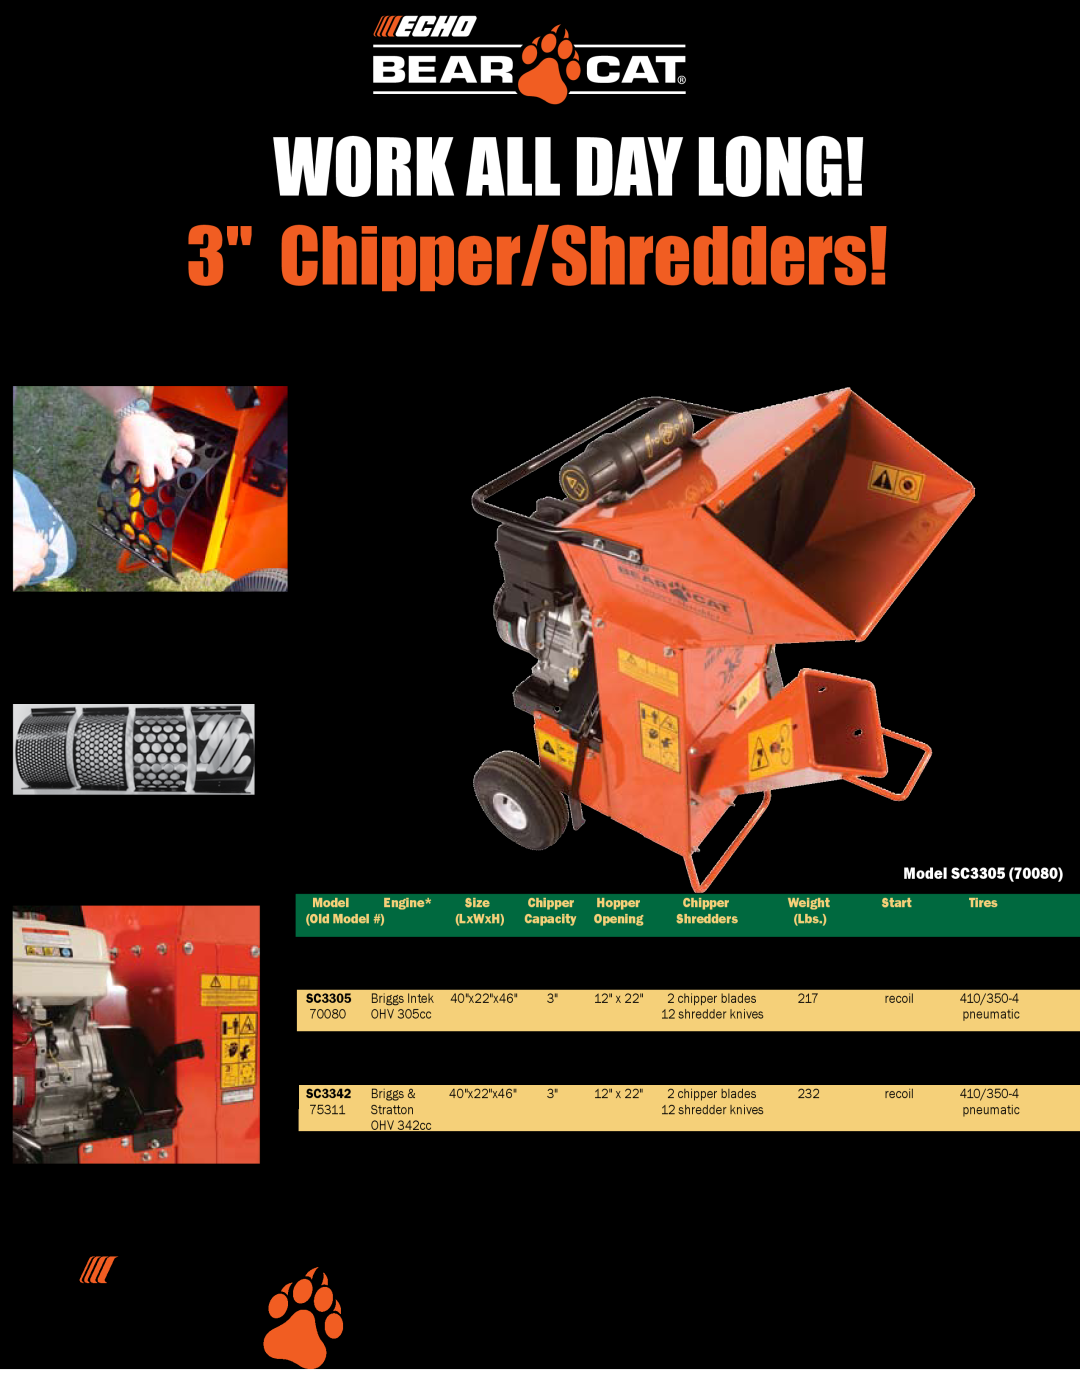 Echo SC3305 (70080) manual Chipper/Shredders, Find a dealer near you, Call us at 800.247.7335 or, Work All Day Long, Model 